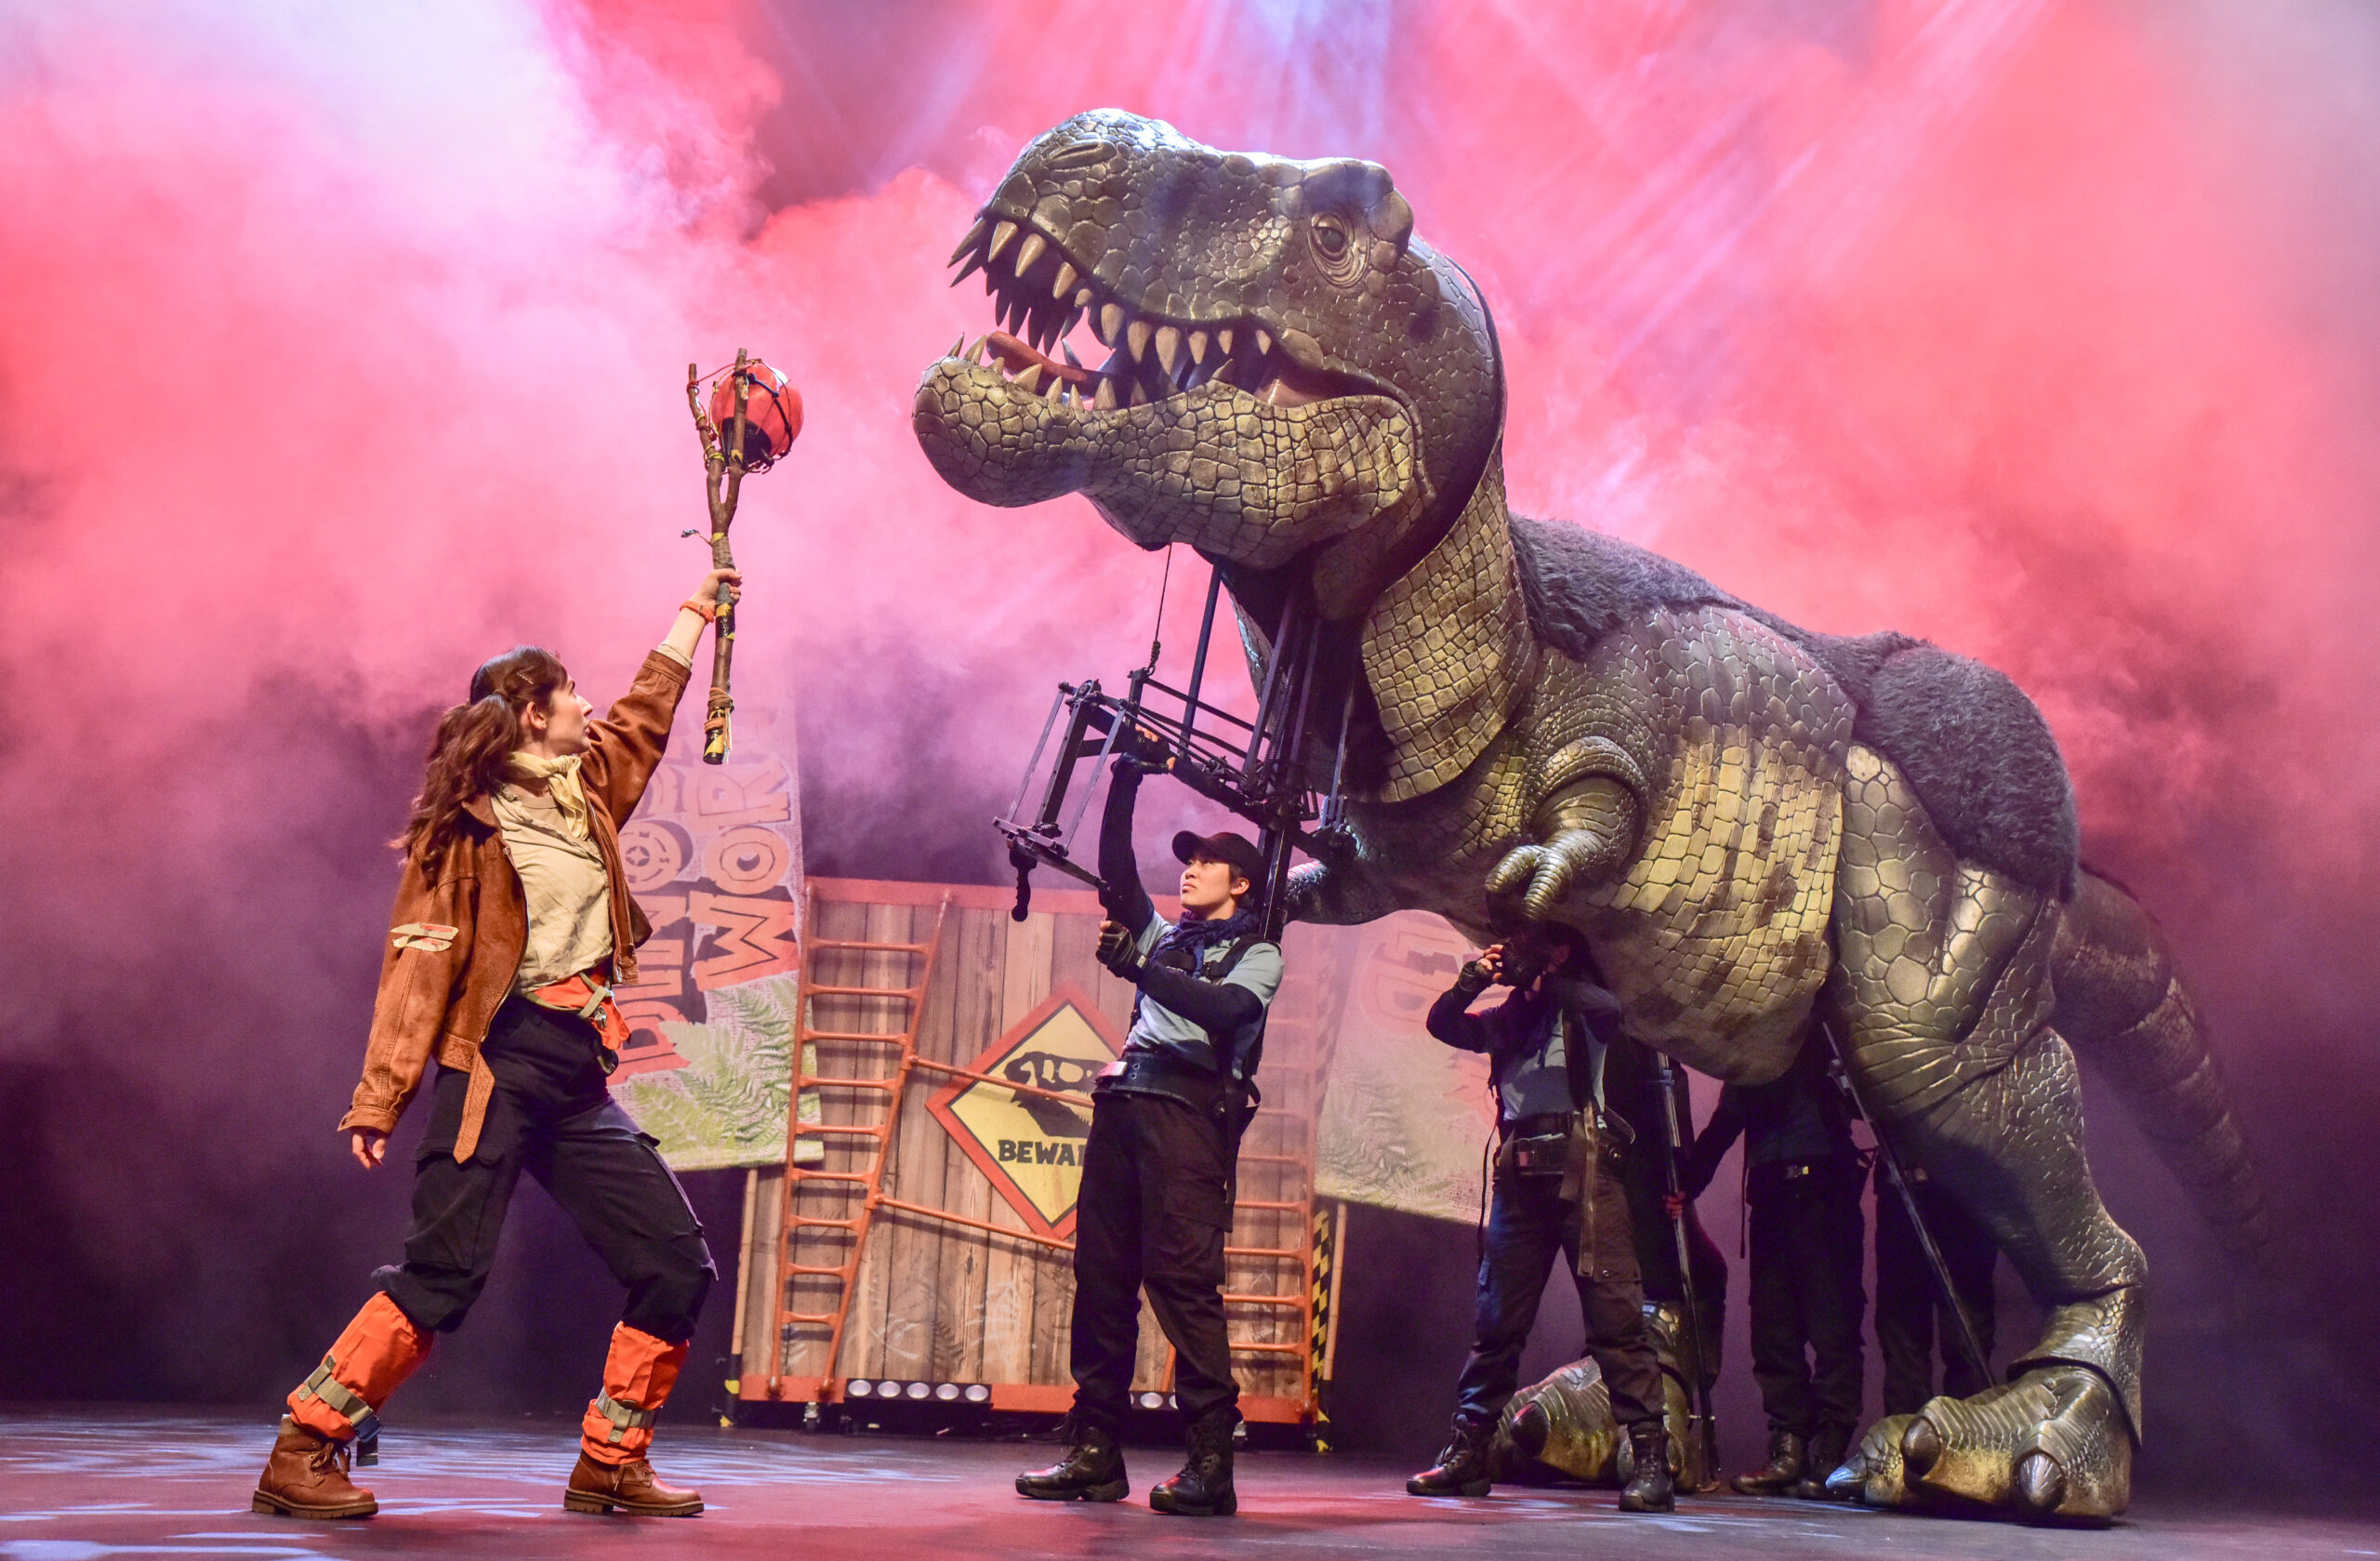 Dare to experience the dangers and delights of Dinosaur World Live in this roarsome interactive show for all the family at the Lime Tree Theatre this July 13-15